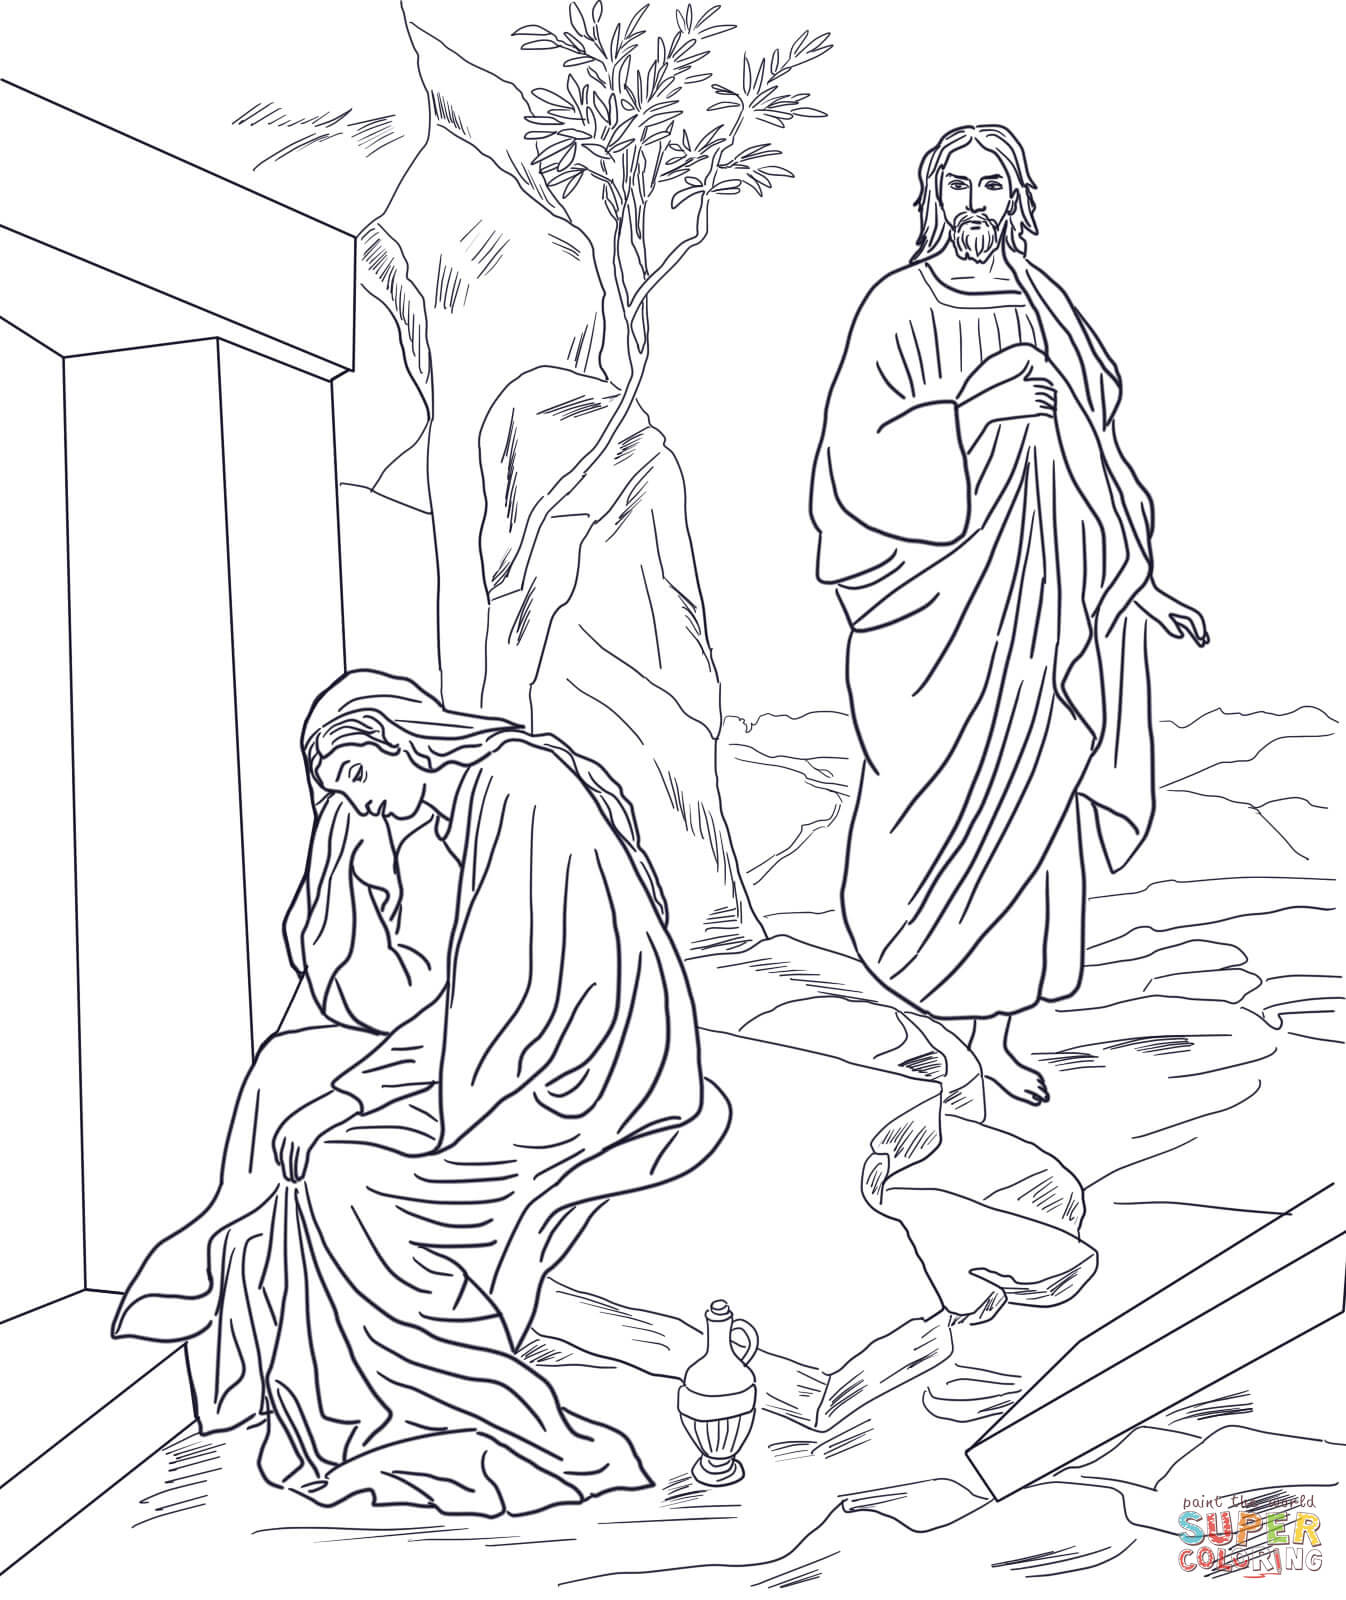 Empty Tomb Coloring Page at GetColorings.com | Free printable colorings